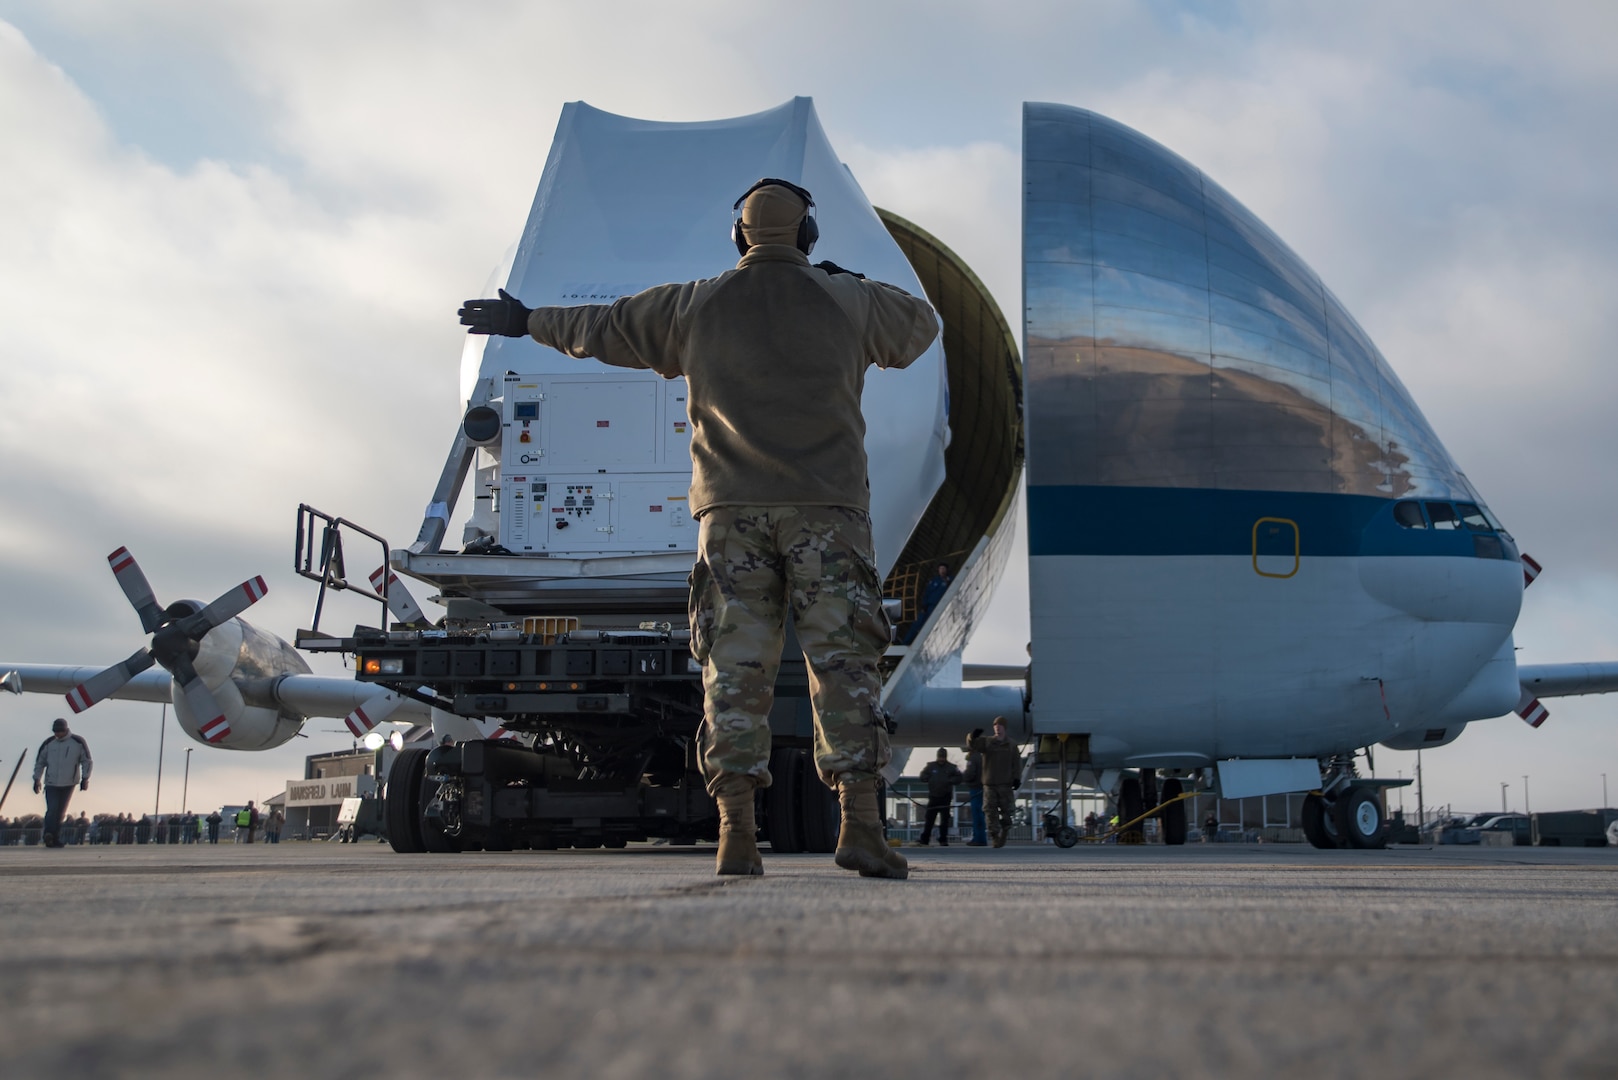 The NASA Super Guppy unloads the Orion space capsule using a 60k loader with assistance from the 179th Airlift Wing, Mansfield, Ohio, Nov. 24, 2019.